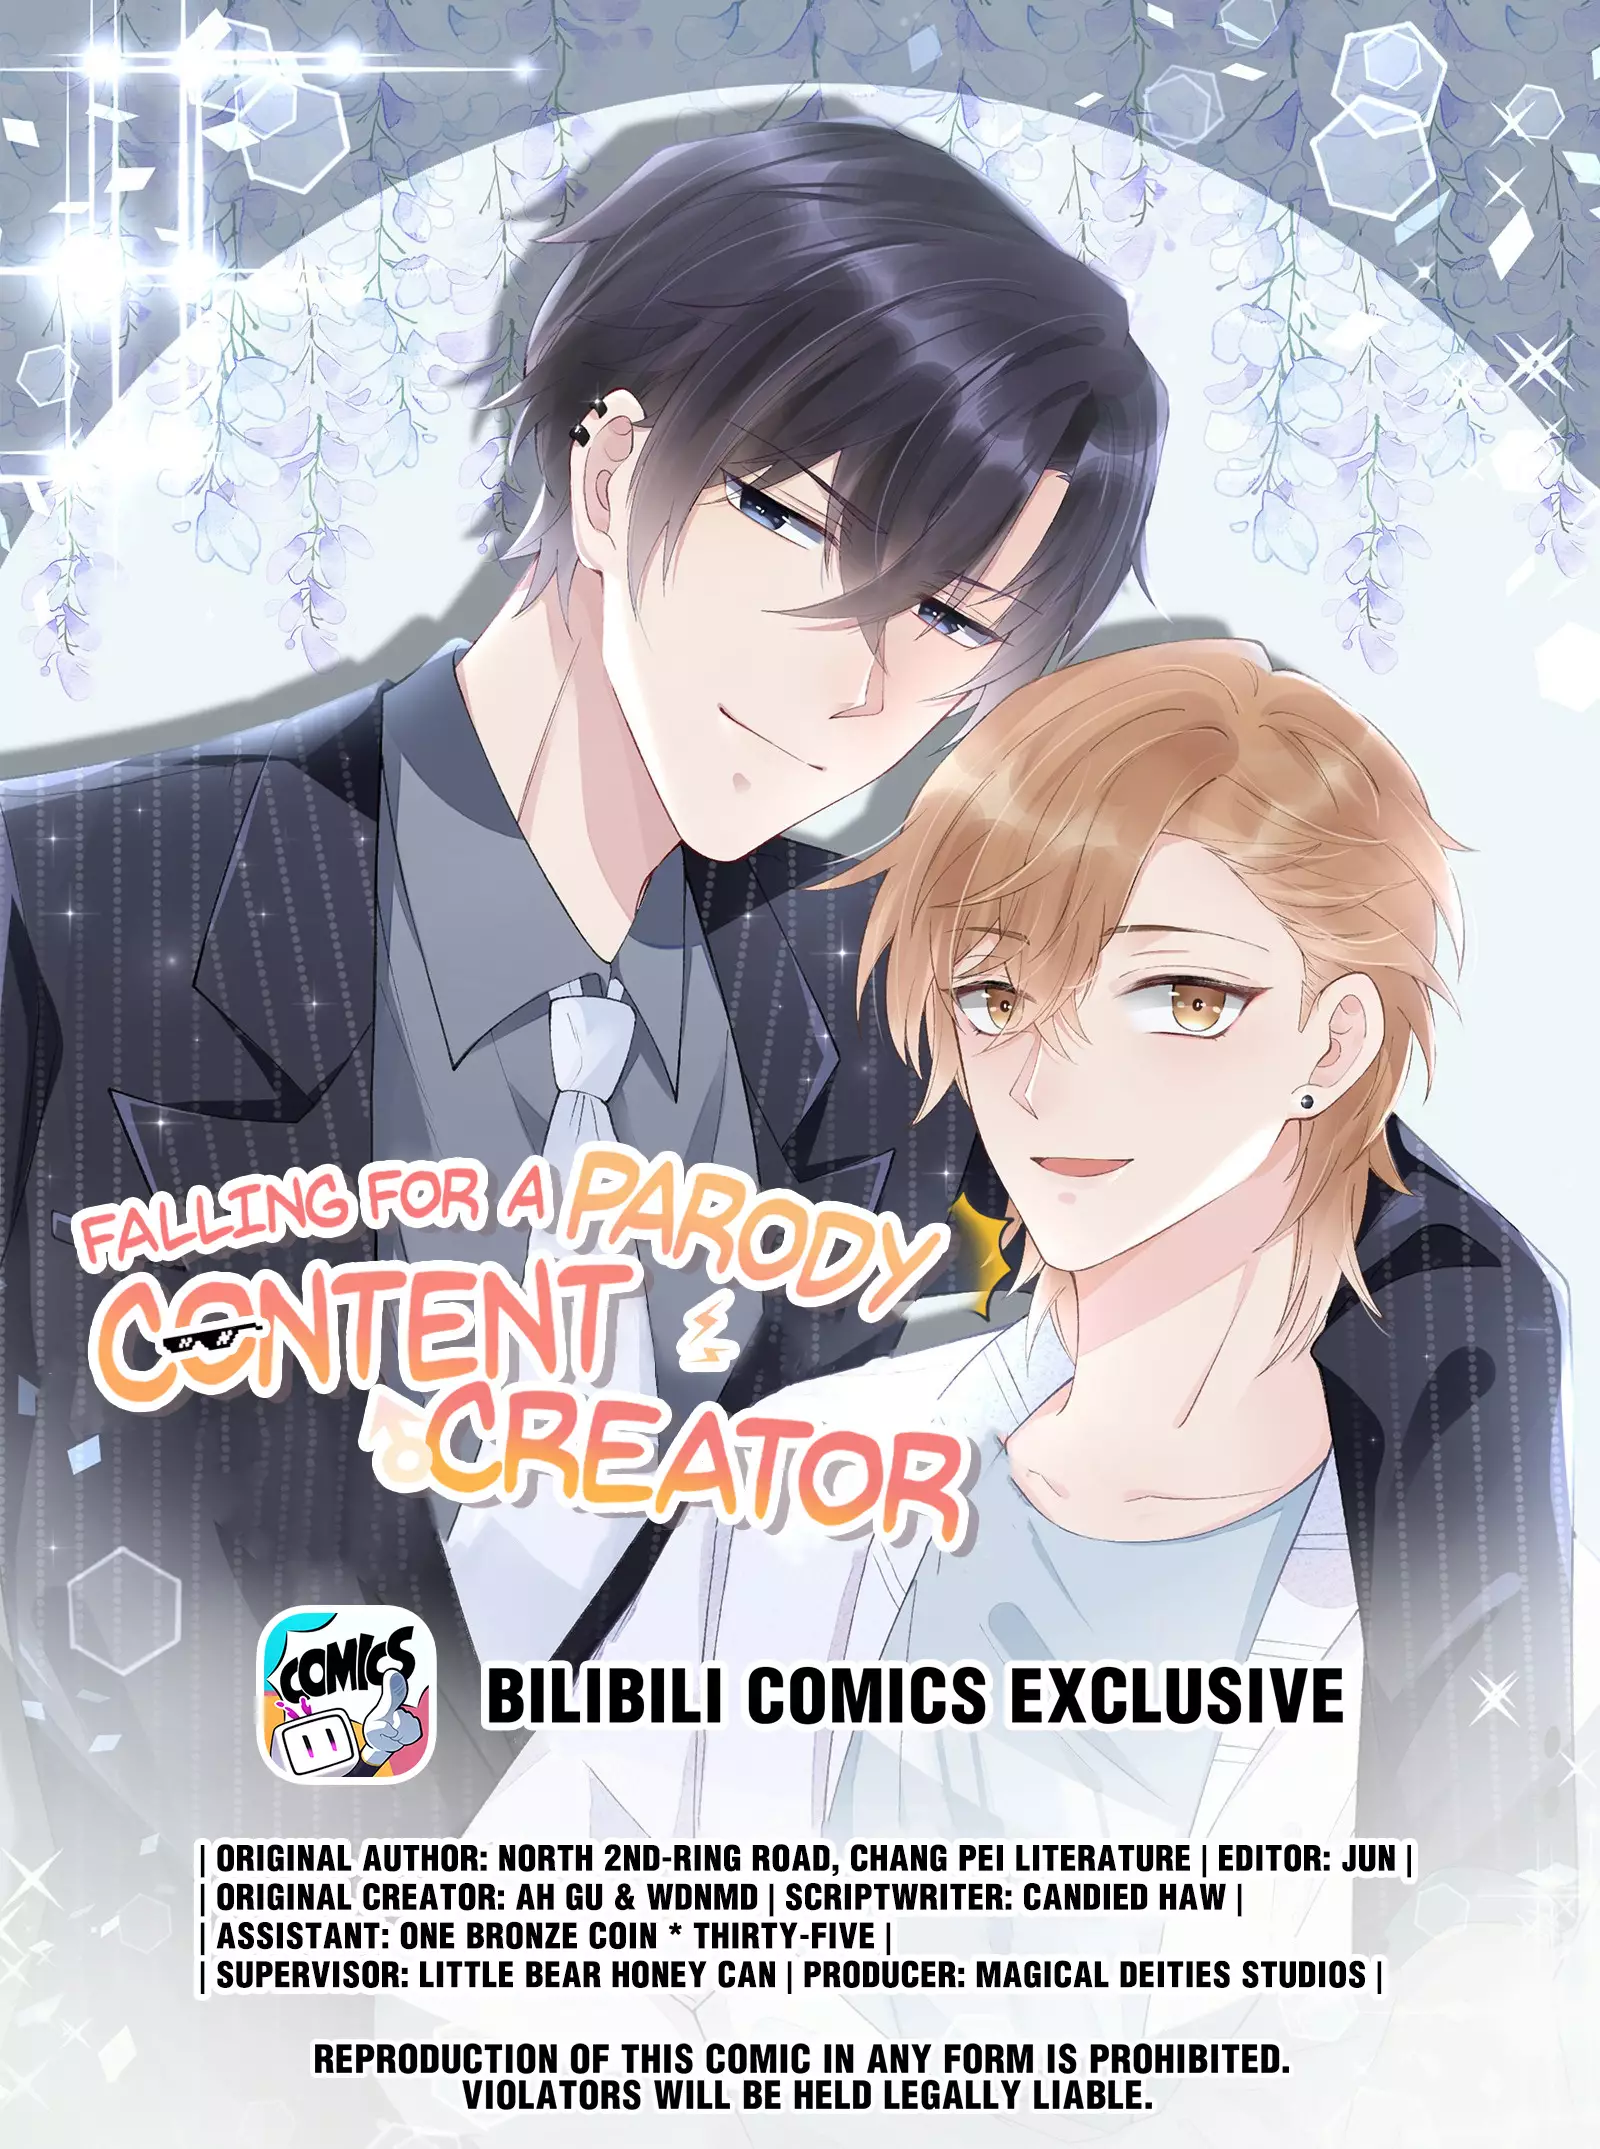 Falling For A Parody Content Creator - 5.1 page 1-e6beda1c